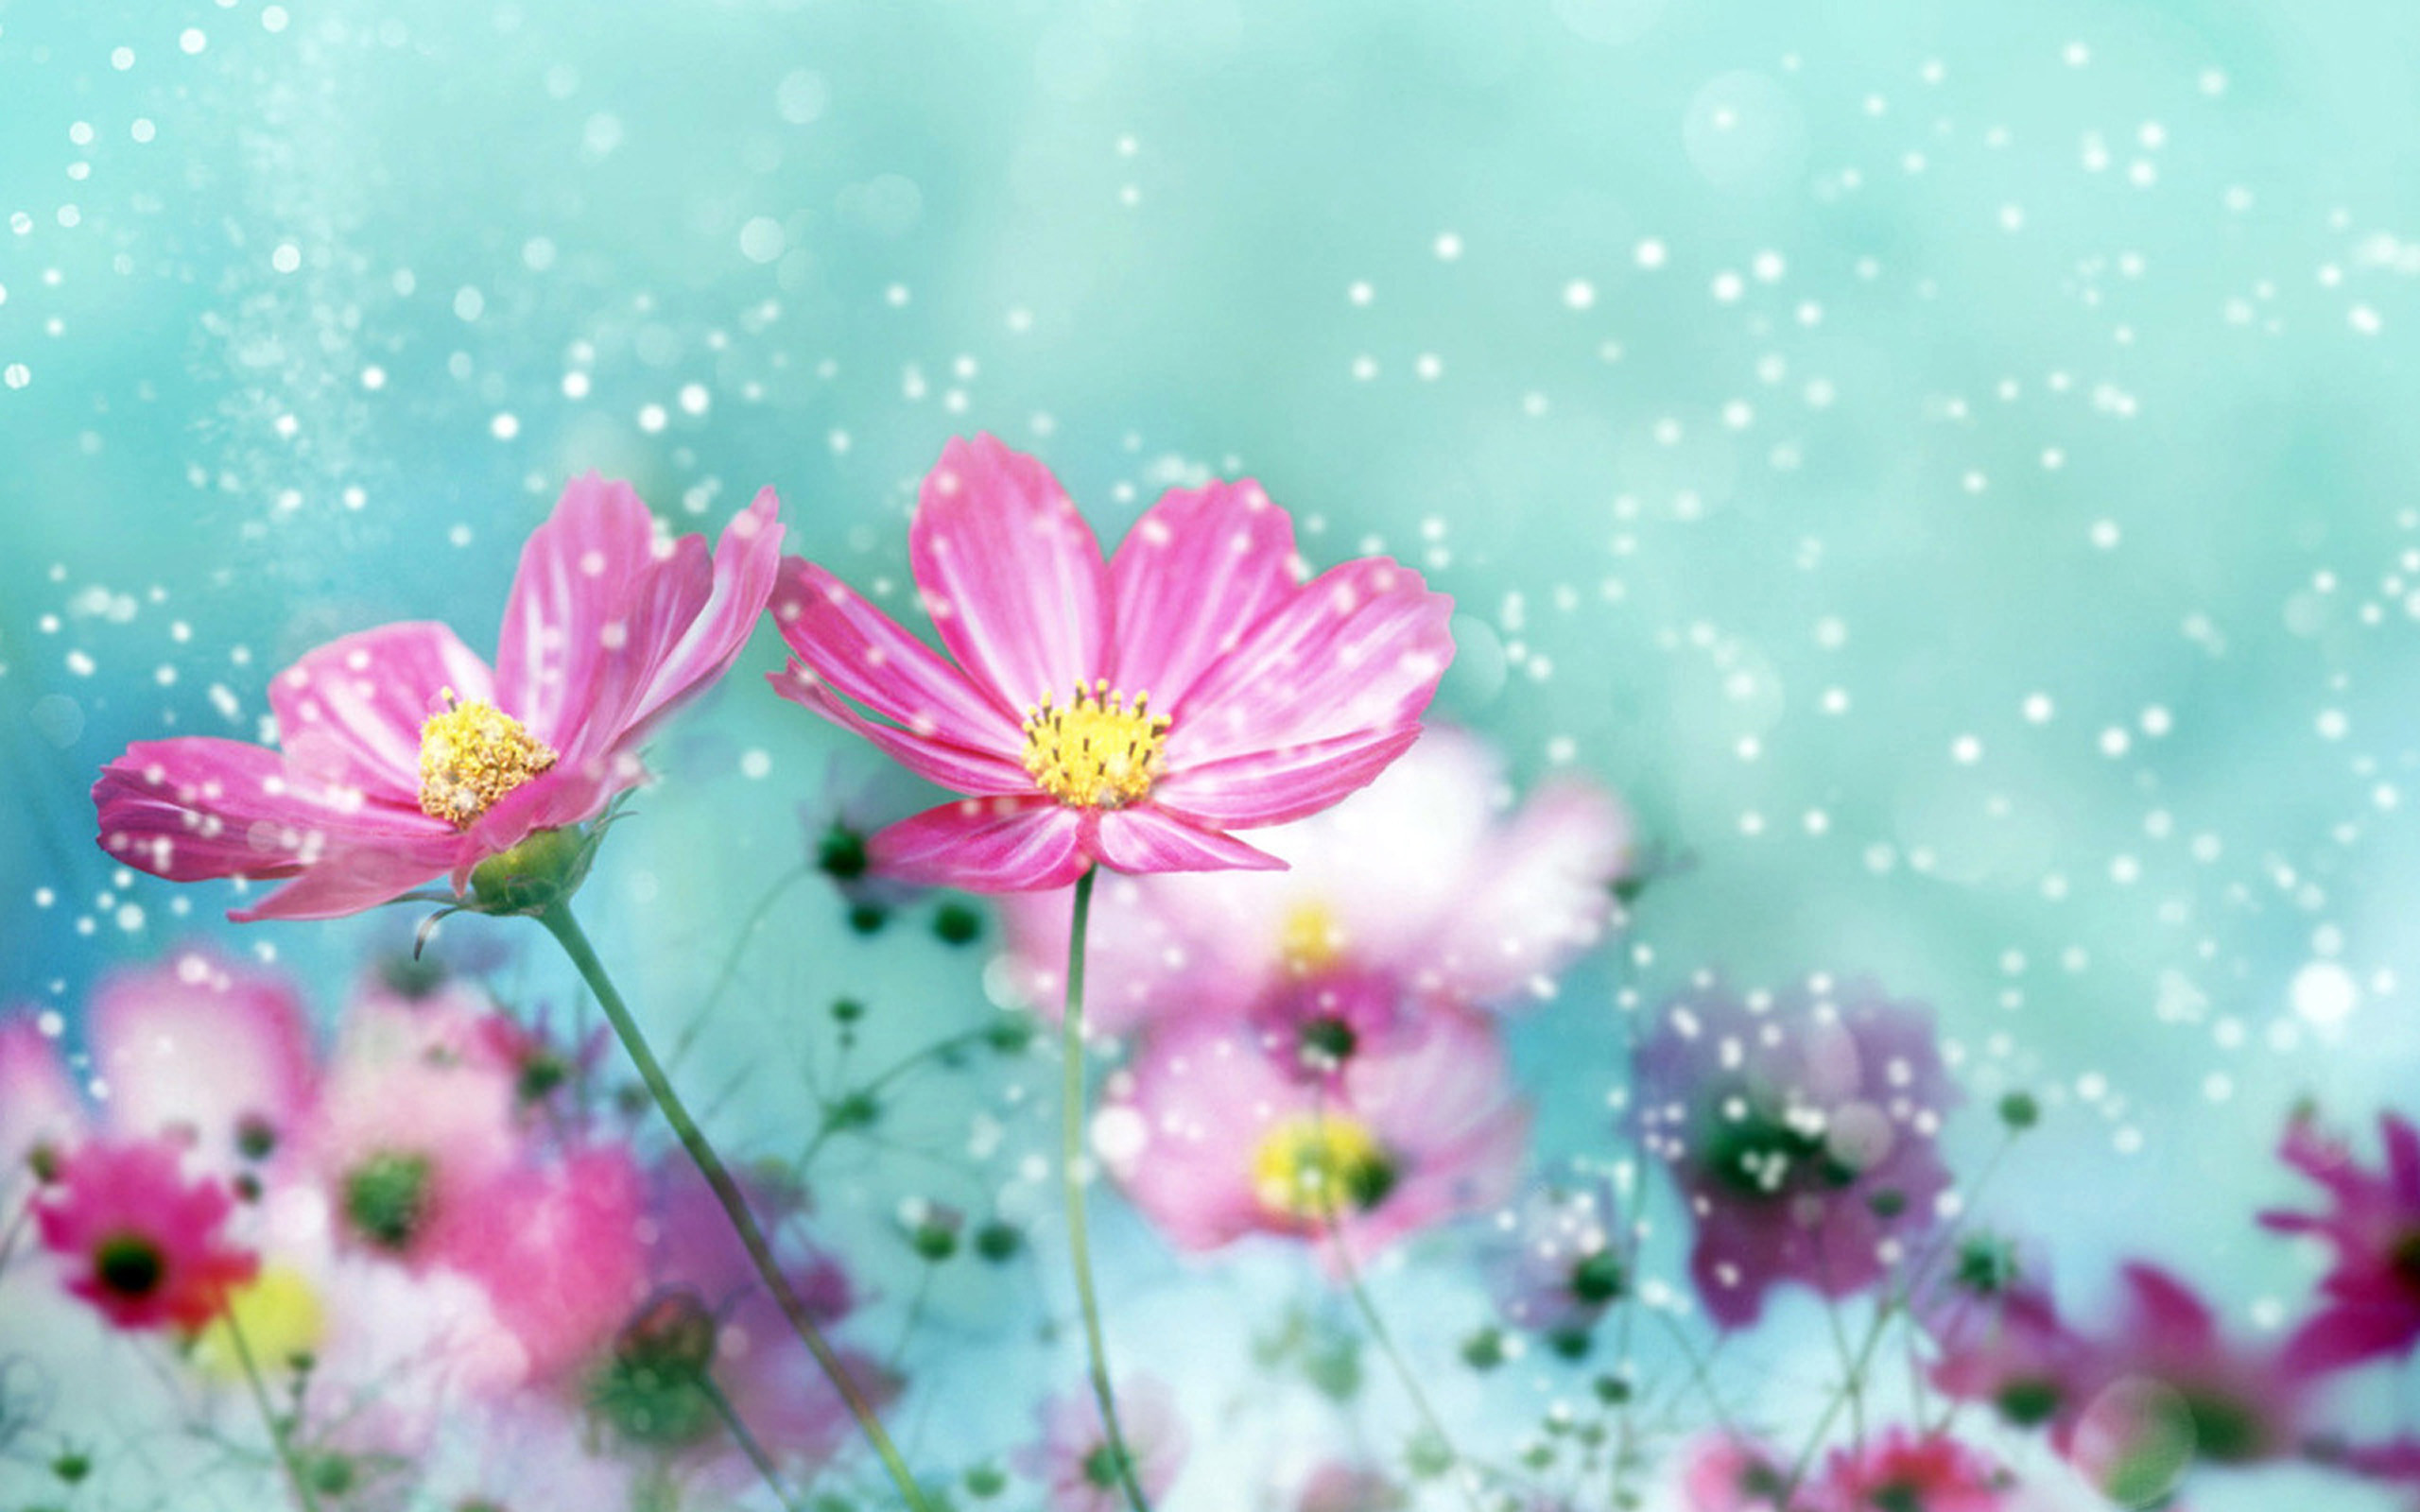 2560x1600 ... Pretty Wallpapers Good Beautiful Flower Wallpaper For Desktop Free  Download To Make Your ...